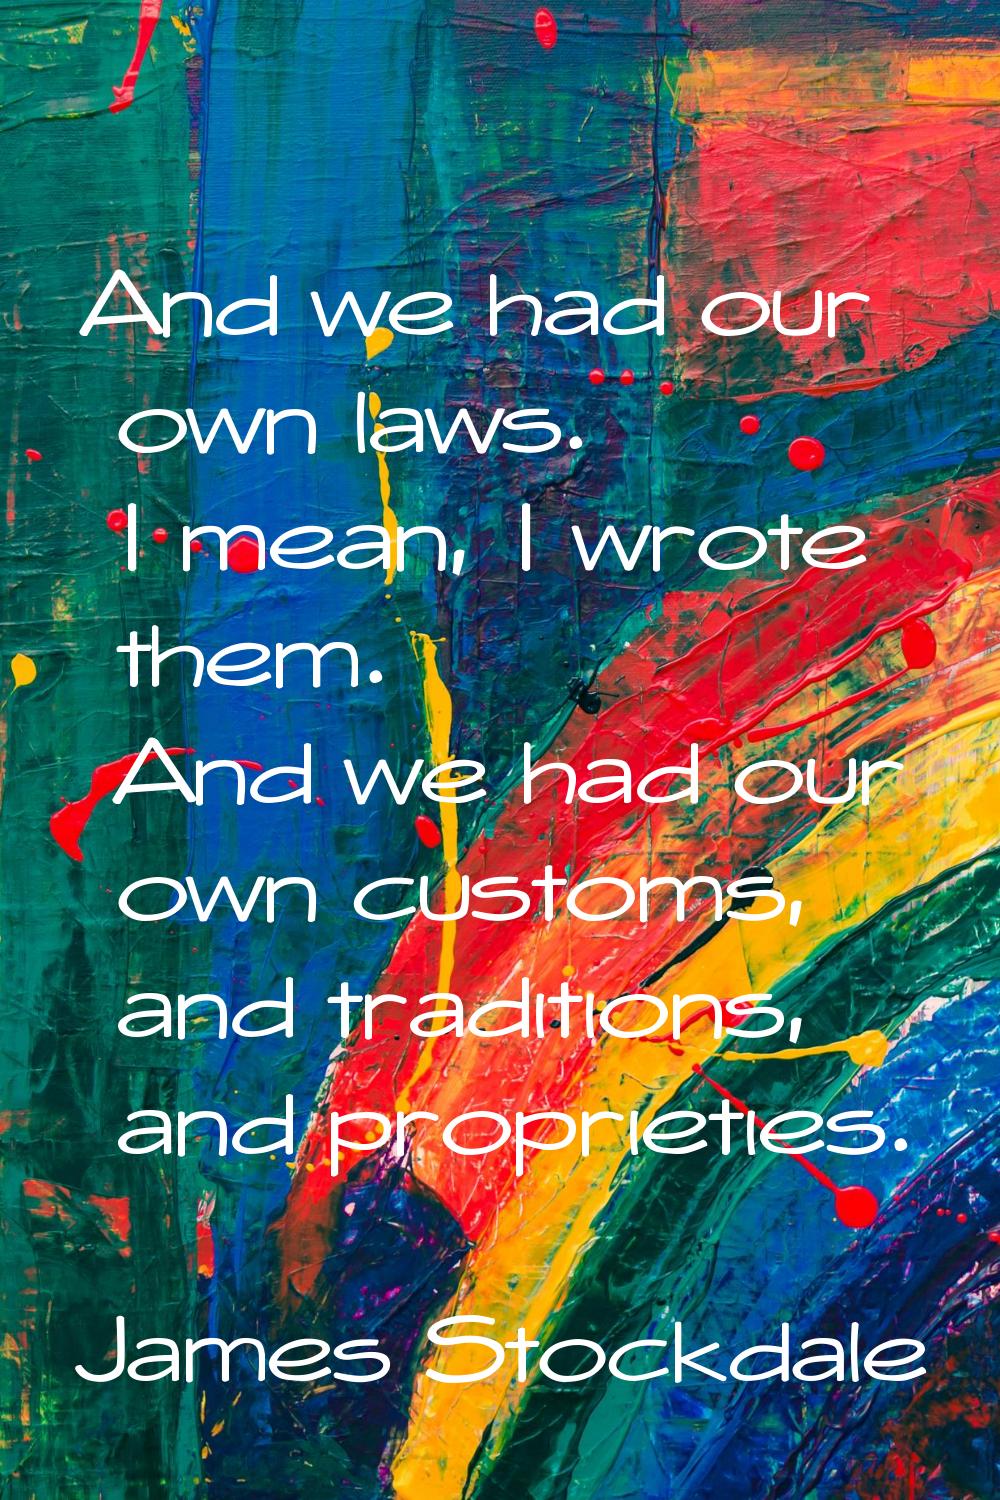 And we had our own laws. I mean, I wrote them. And we had our own customs, and traditions, and prop